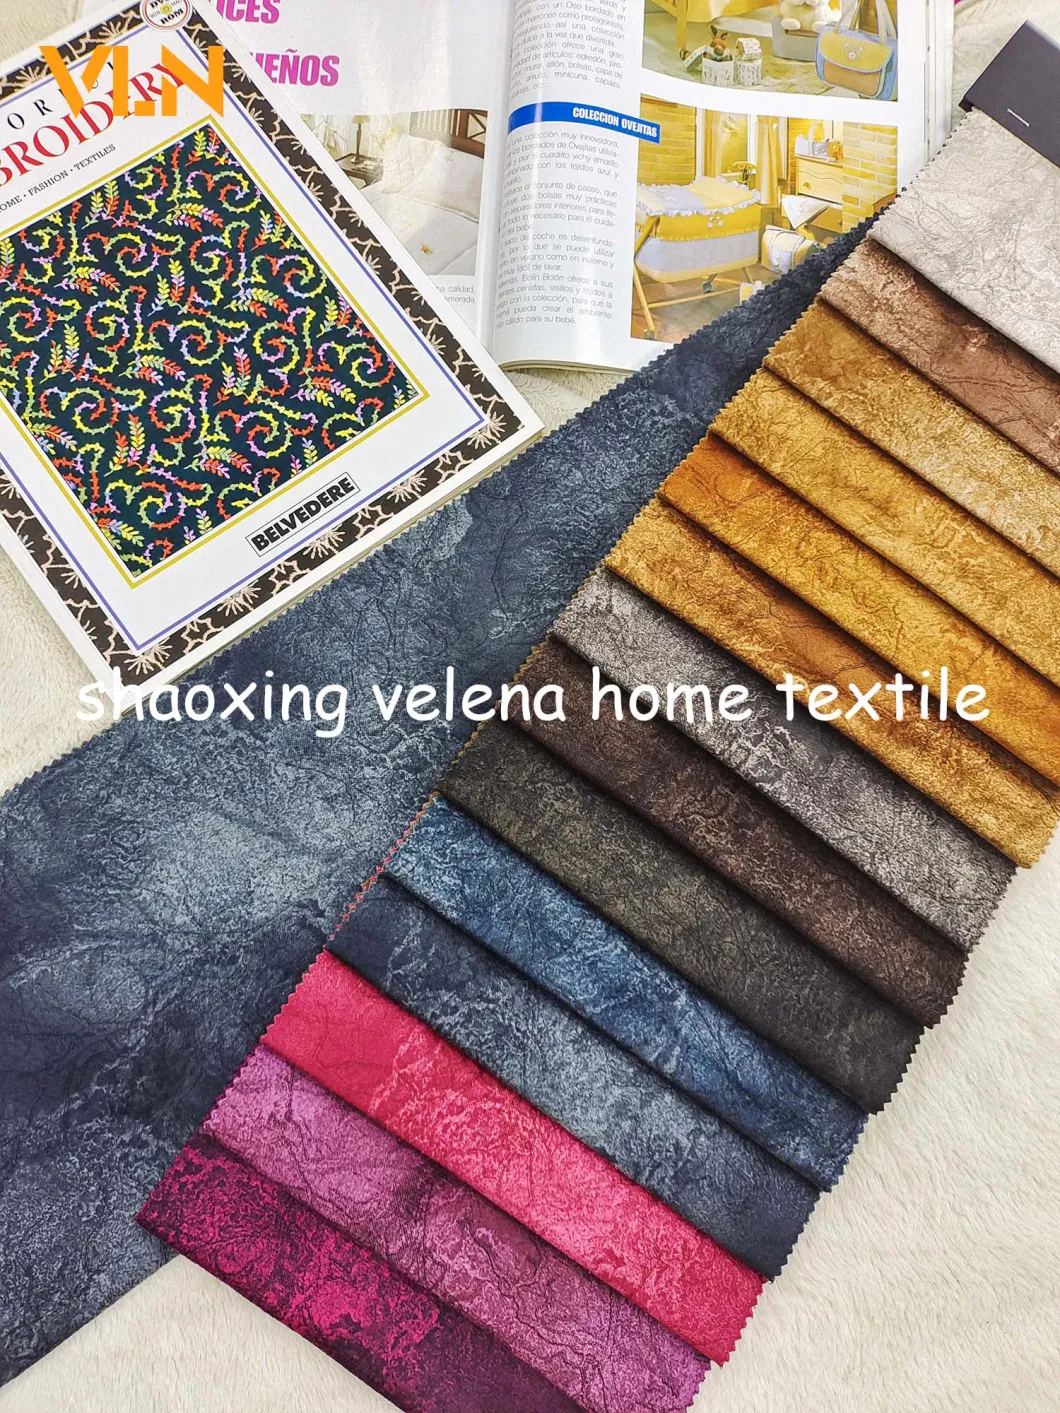 Home Textiles 100% Polyester Holland Velevt Matt Finished Dyeing with Printing and Foil Terciopelo Upholstery Furniture Fabric 0216-1